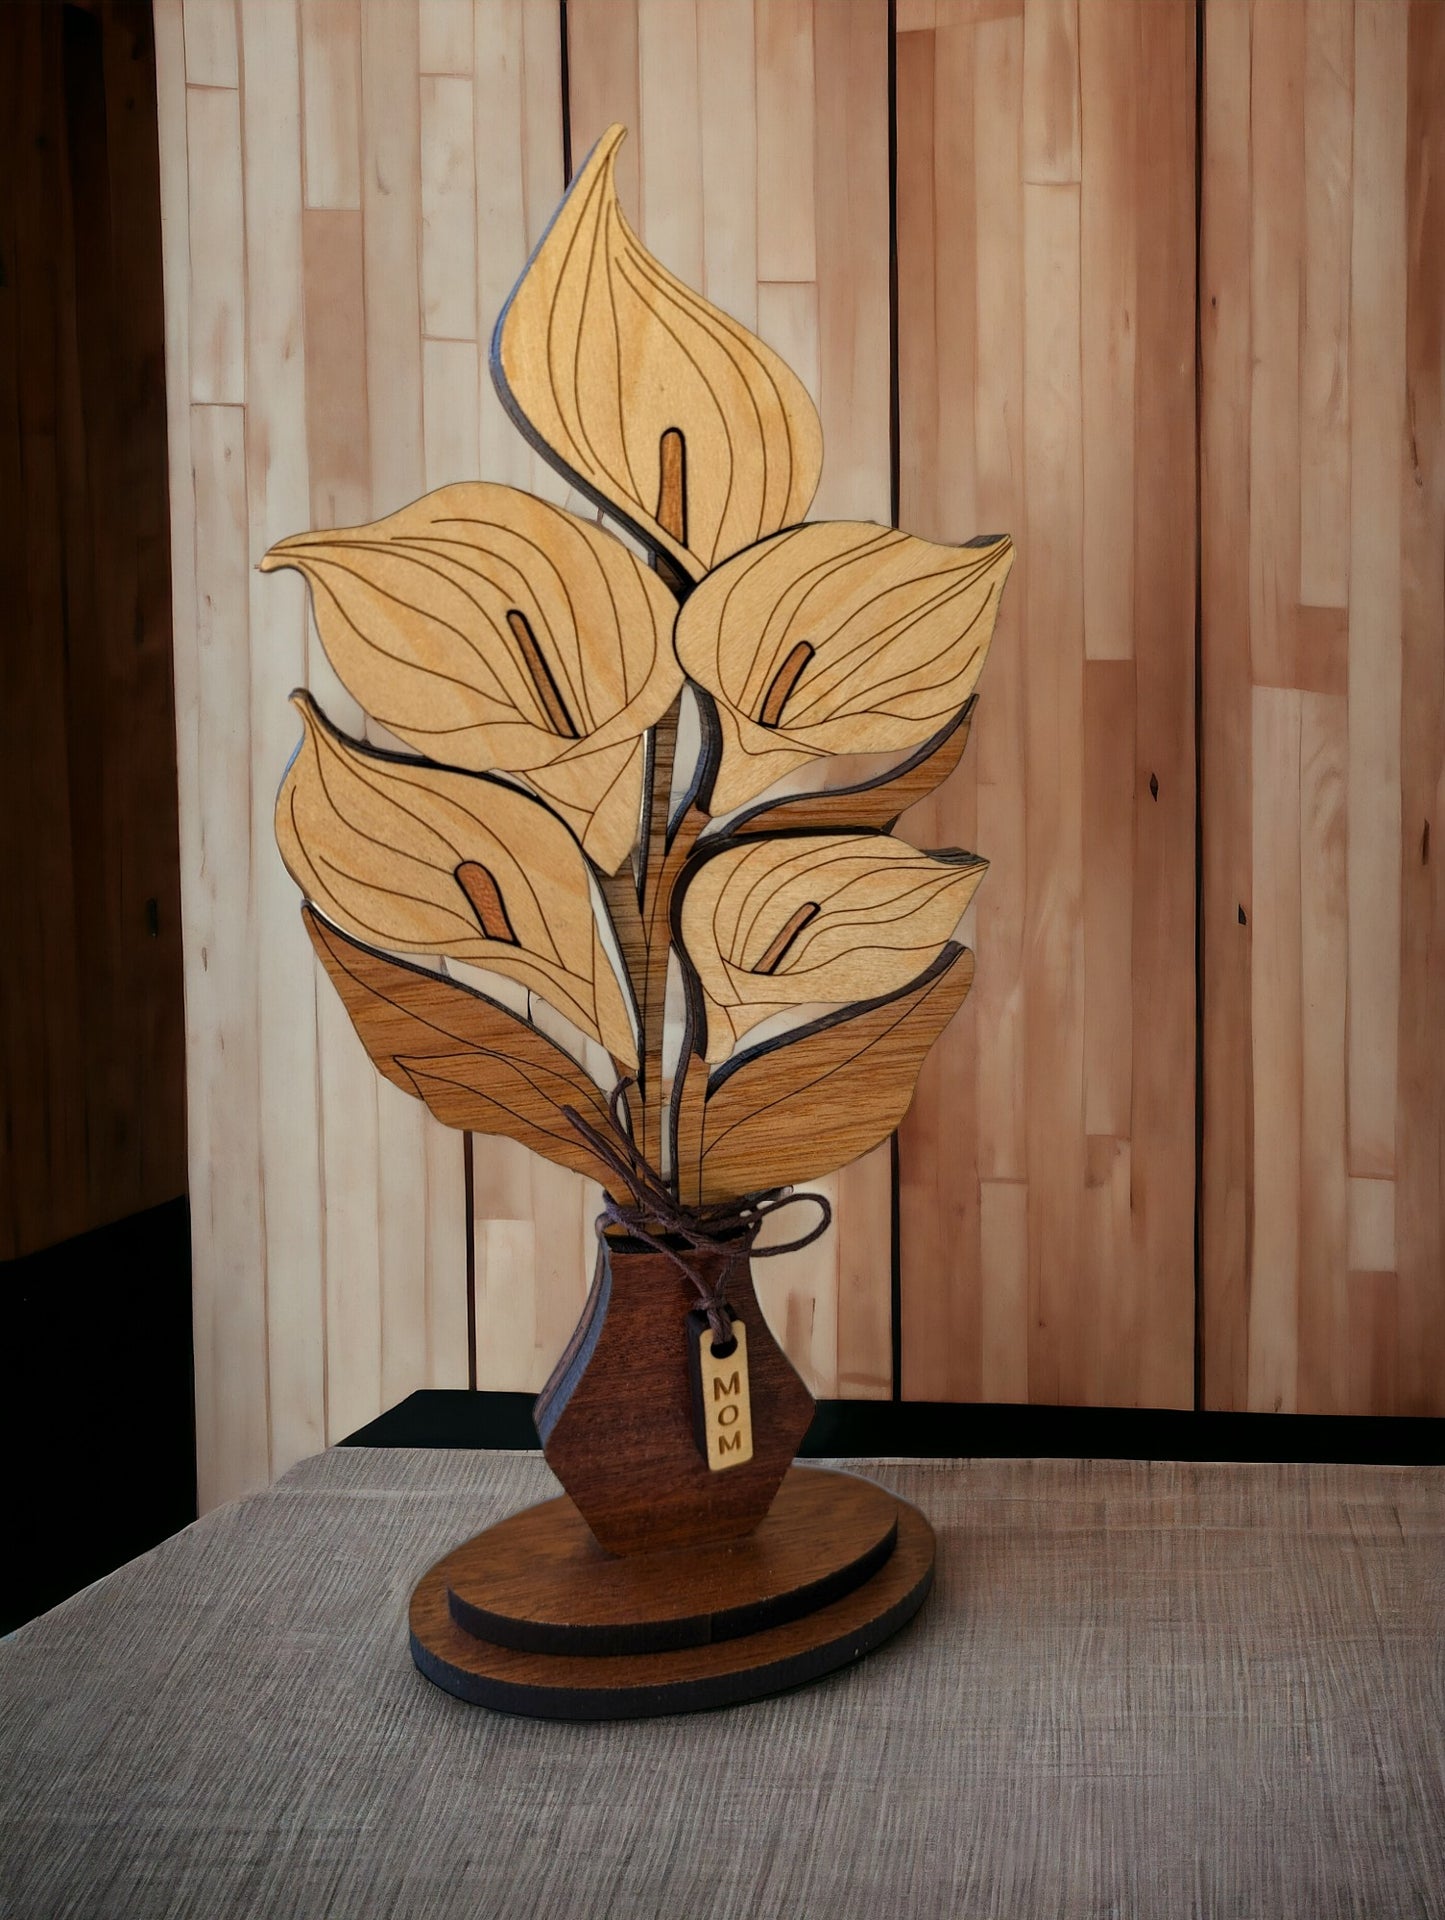 Everlasting Blooms: Handcrafted wooden calla lily floral bouquets for gift giving